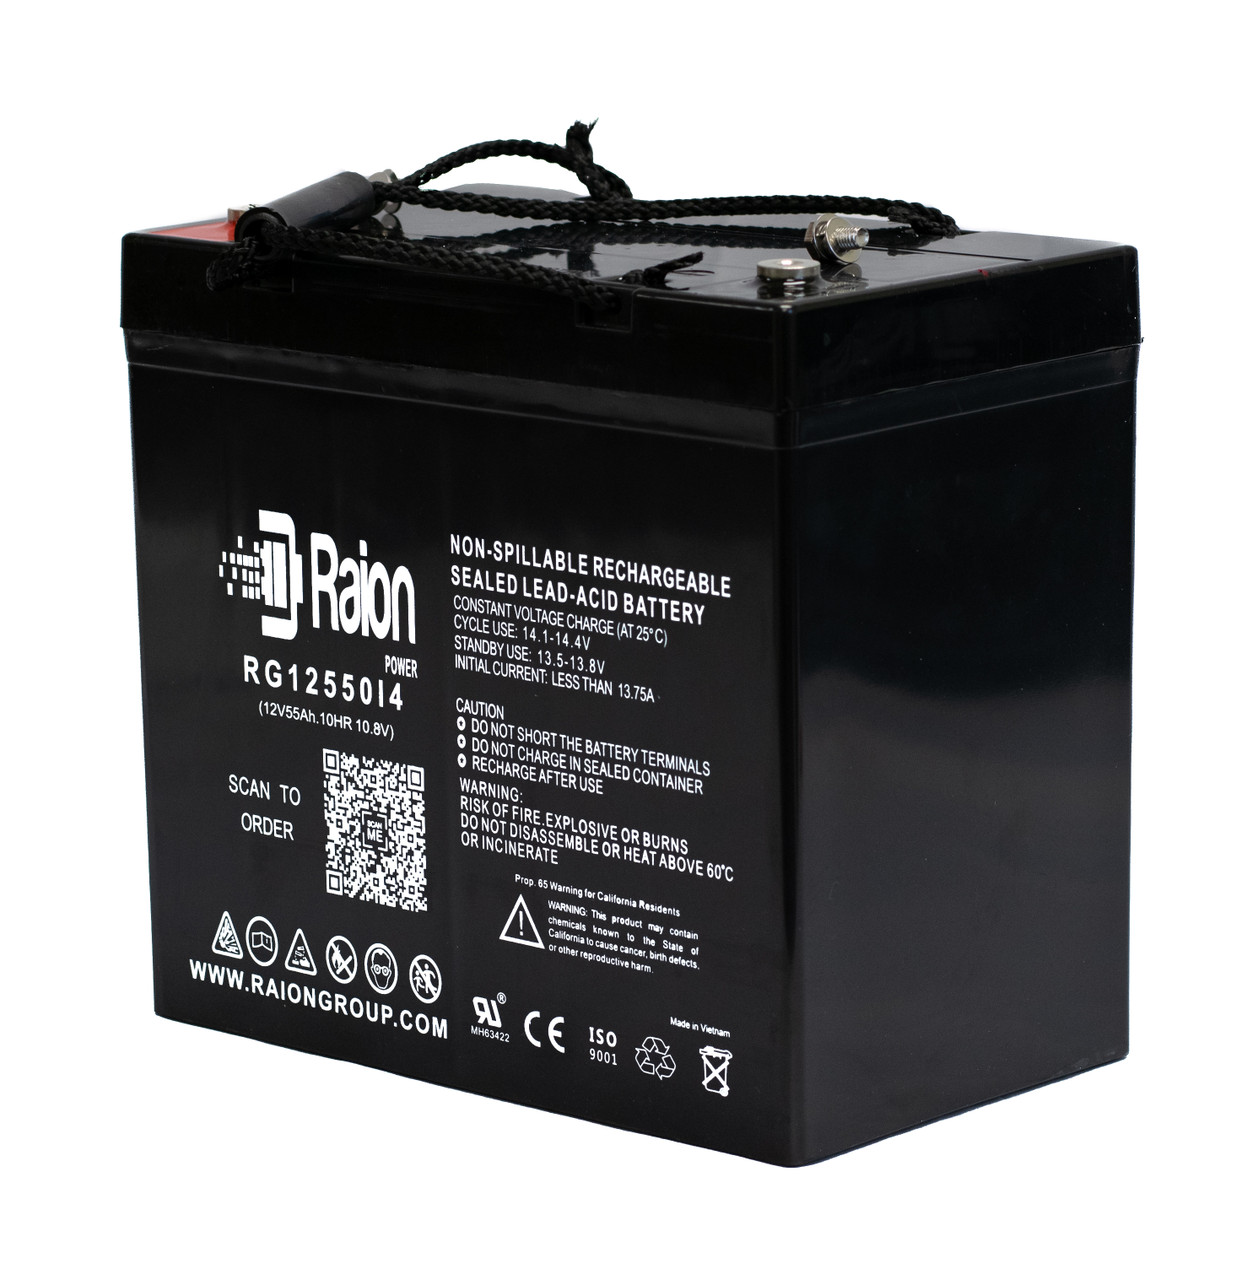 Raion Power 12V 55Ah 22NF Mobility Scooter Battery Replacement for Invacare Pronto M94